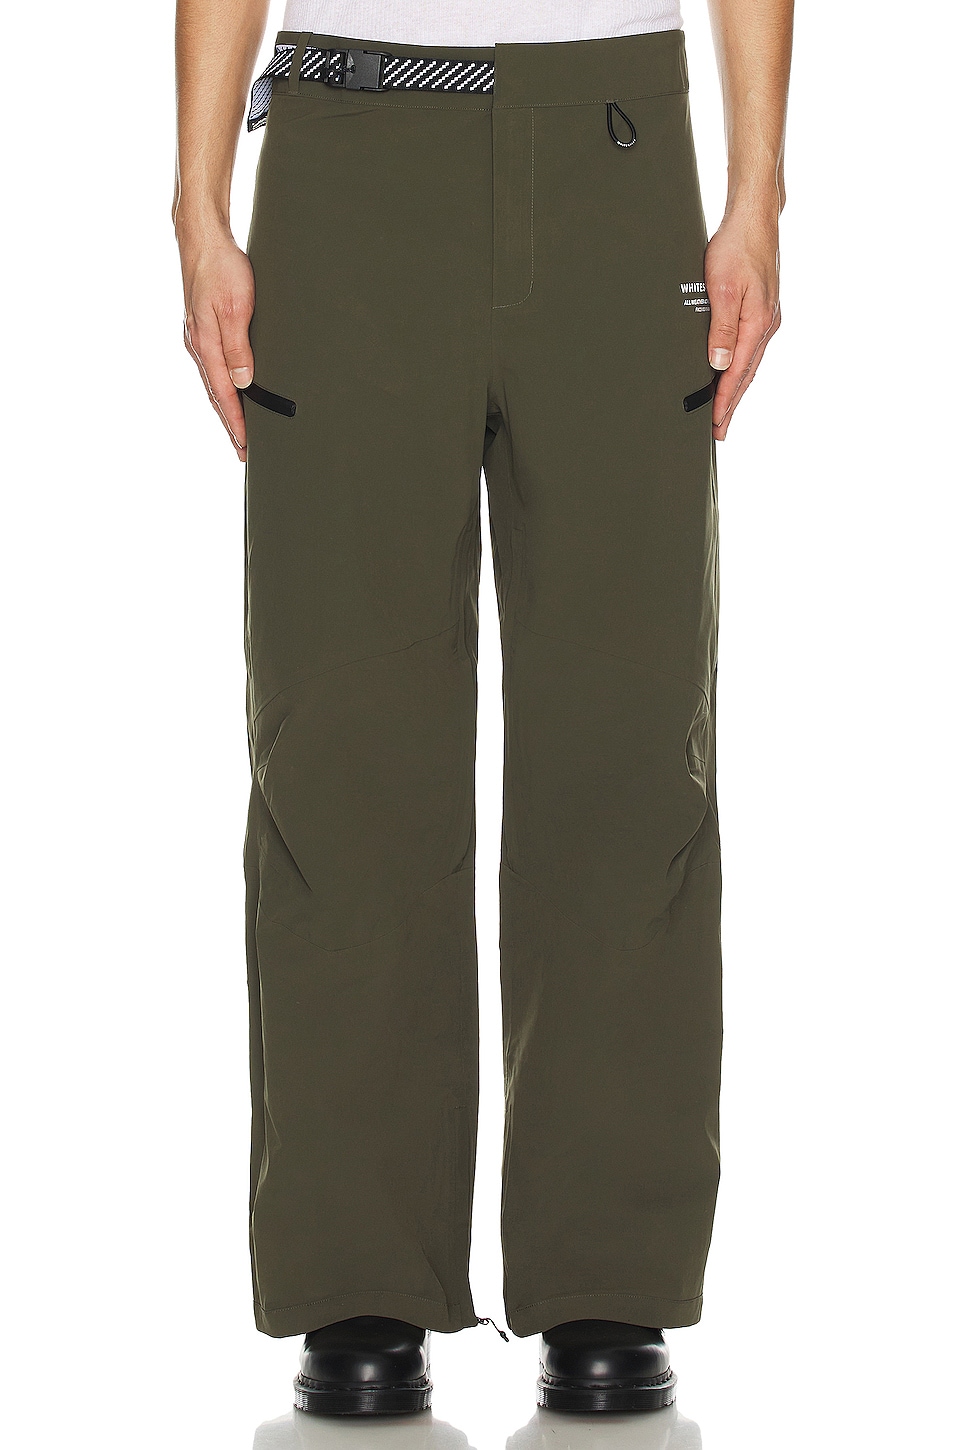 Image 1 of Whitespace 3l Performance Pant in Forest Green